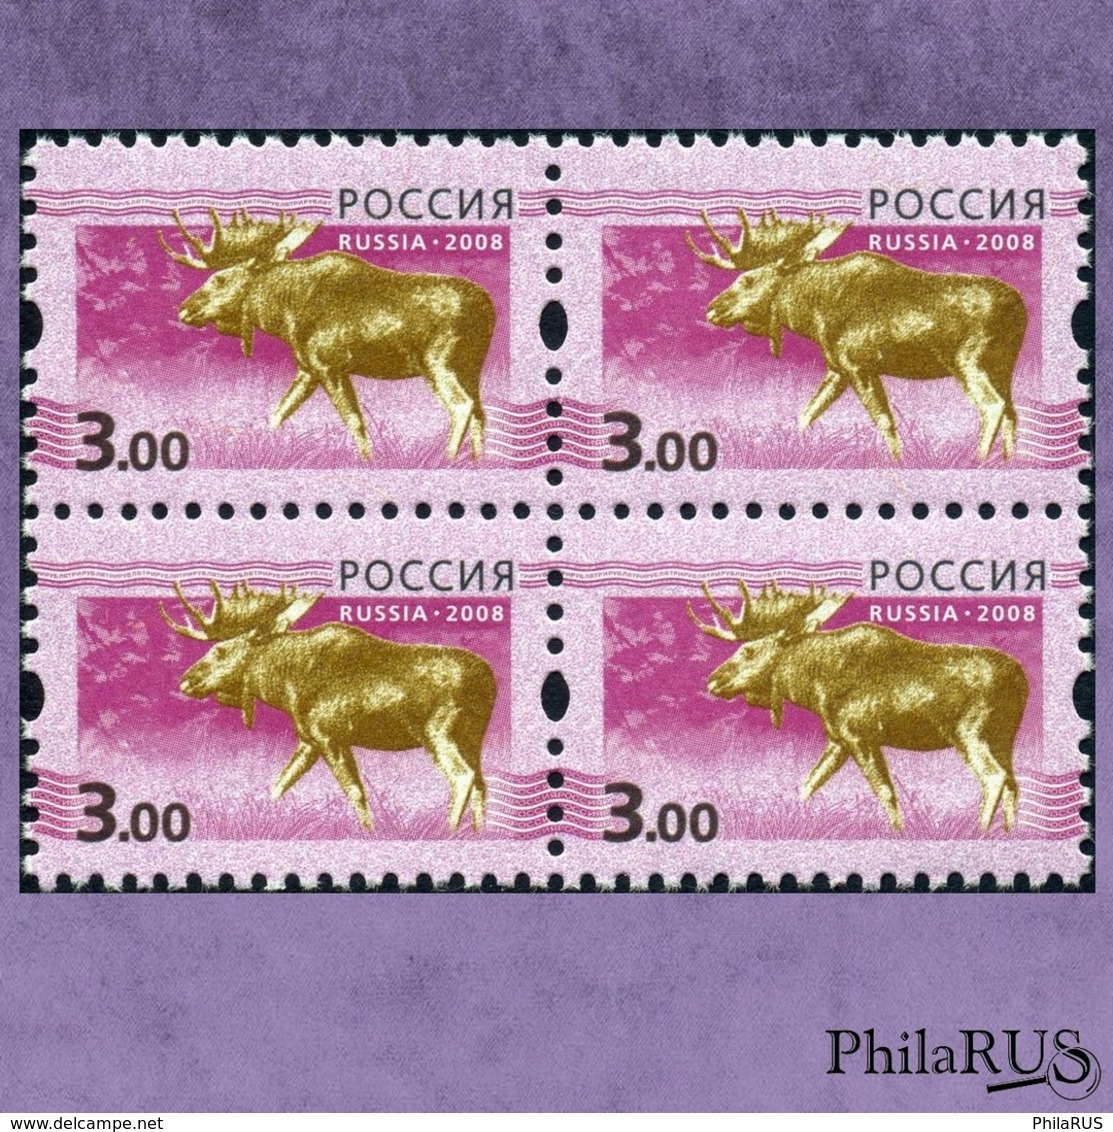 RARE! RUSSIA 2008(2010?) Mi.1491 5th Definitive Issue Fauna Elk 3-00 ERROR! -> Without Protect Line / Bl. Of 4 - Variedades & Curiosidades